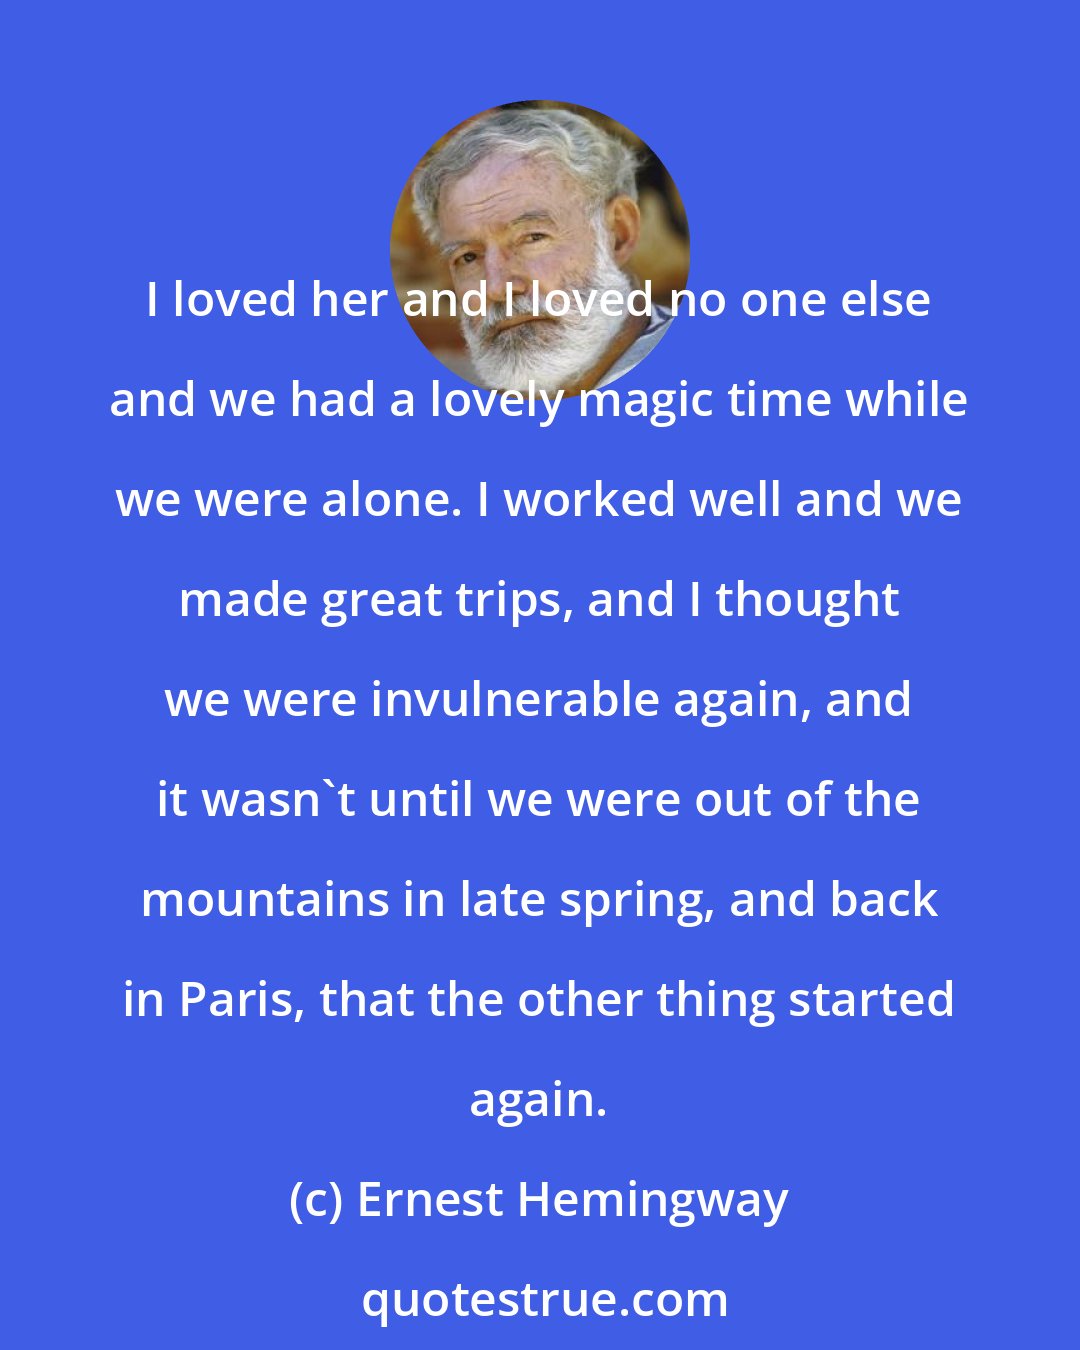 Ernest Hemingway: I loved her and I loved no one else and we had a lovely magic time while we were alone. I worked well and we made great trips, and I thought we were invulnerable again, and it wasn't until we were out of the mountains in late spring, and back in Paris, that the other thing started again.